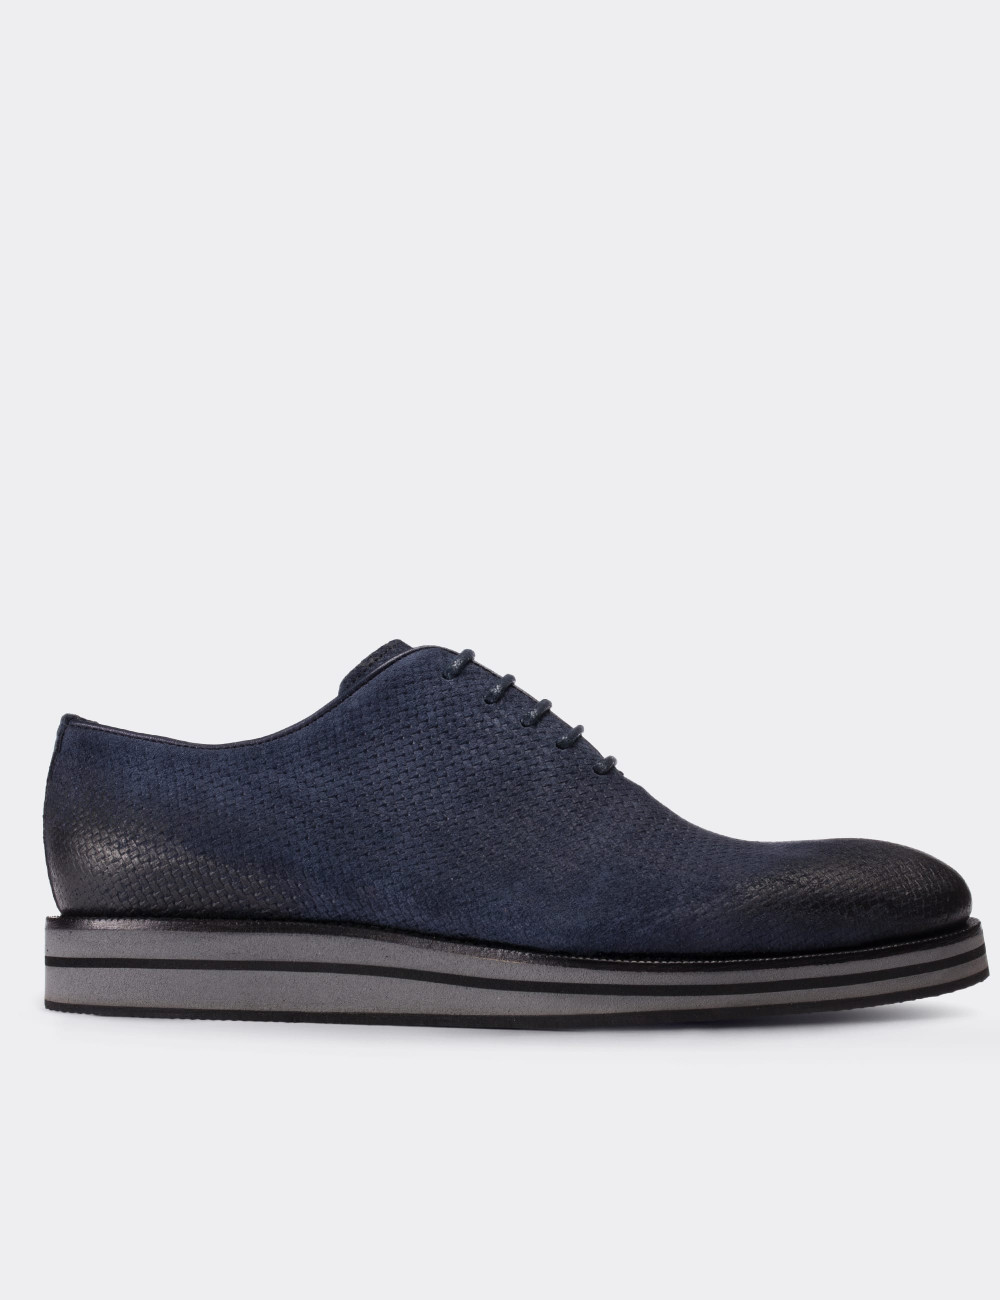 Navy Suede Leather Lace-up Shoes - 01616MLCVE07